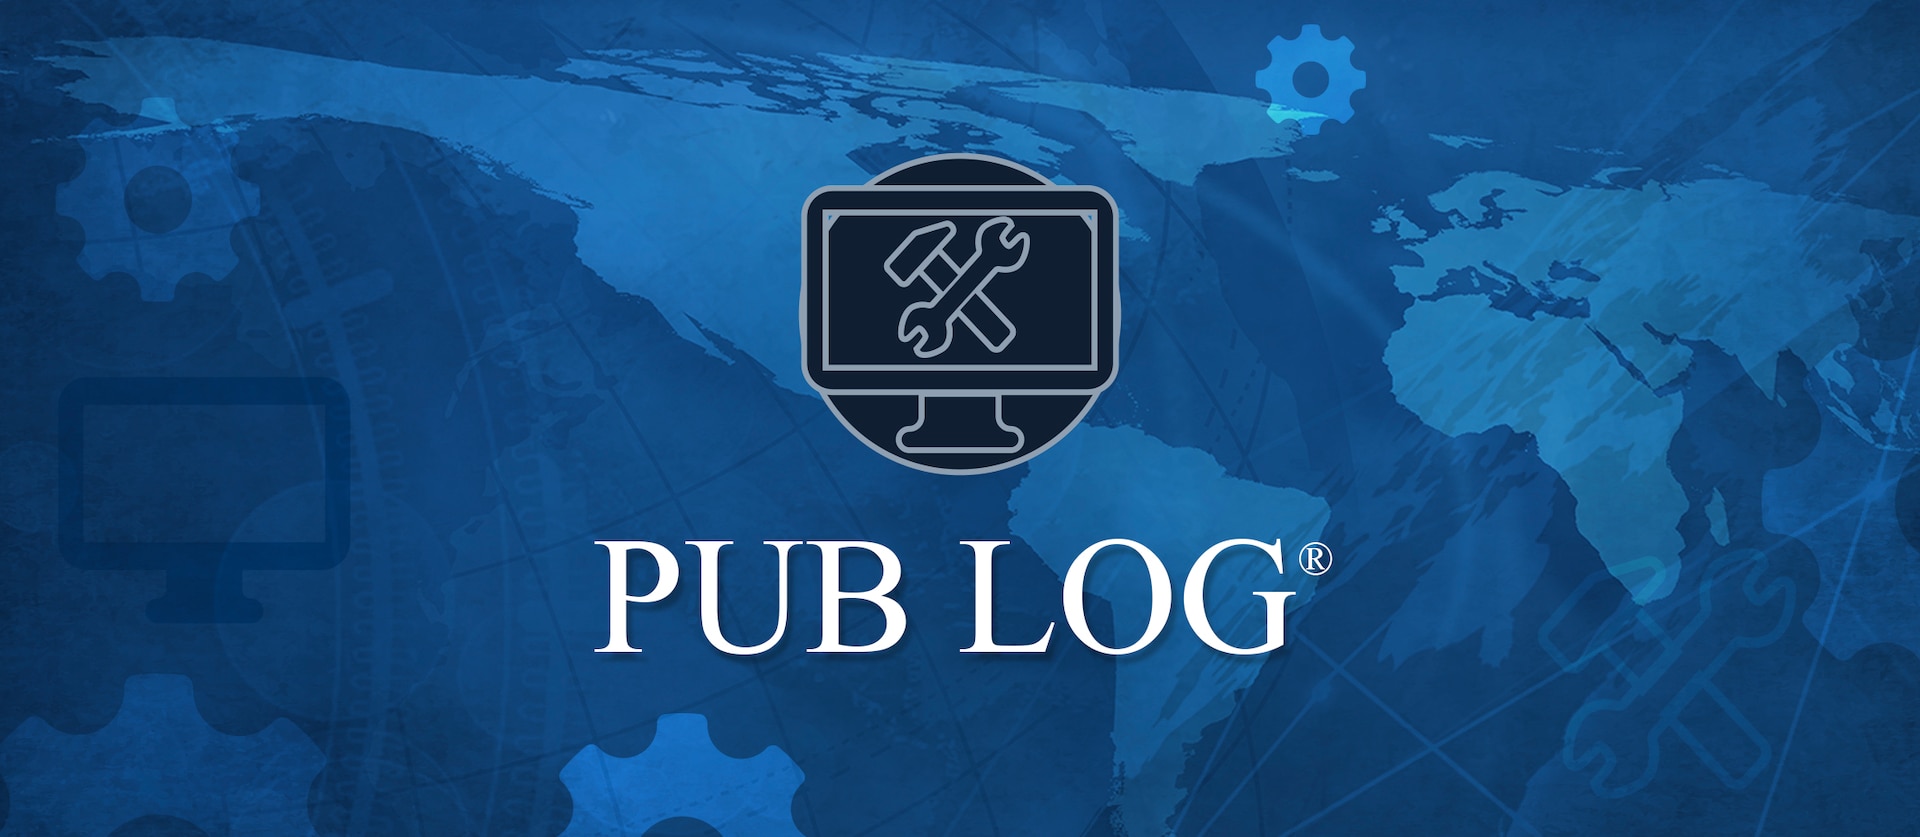 Text for PUB LOG® accompanied by an icon with a monitor with crossed hammer and wrench on the screen, on an abstract blue map background